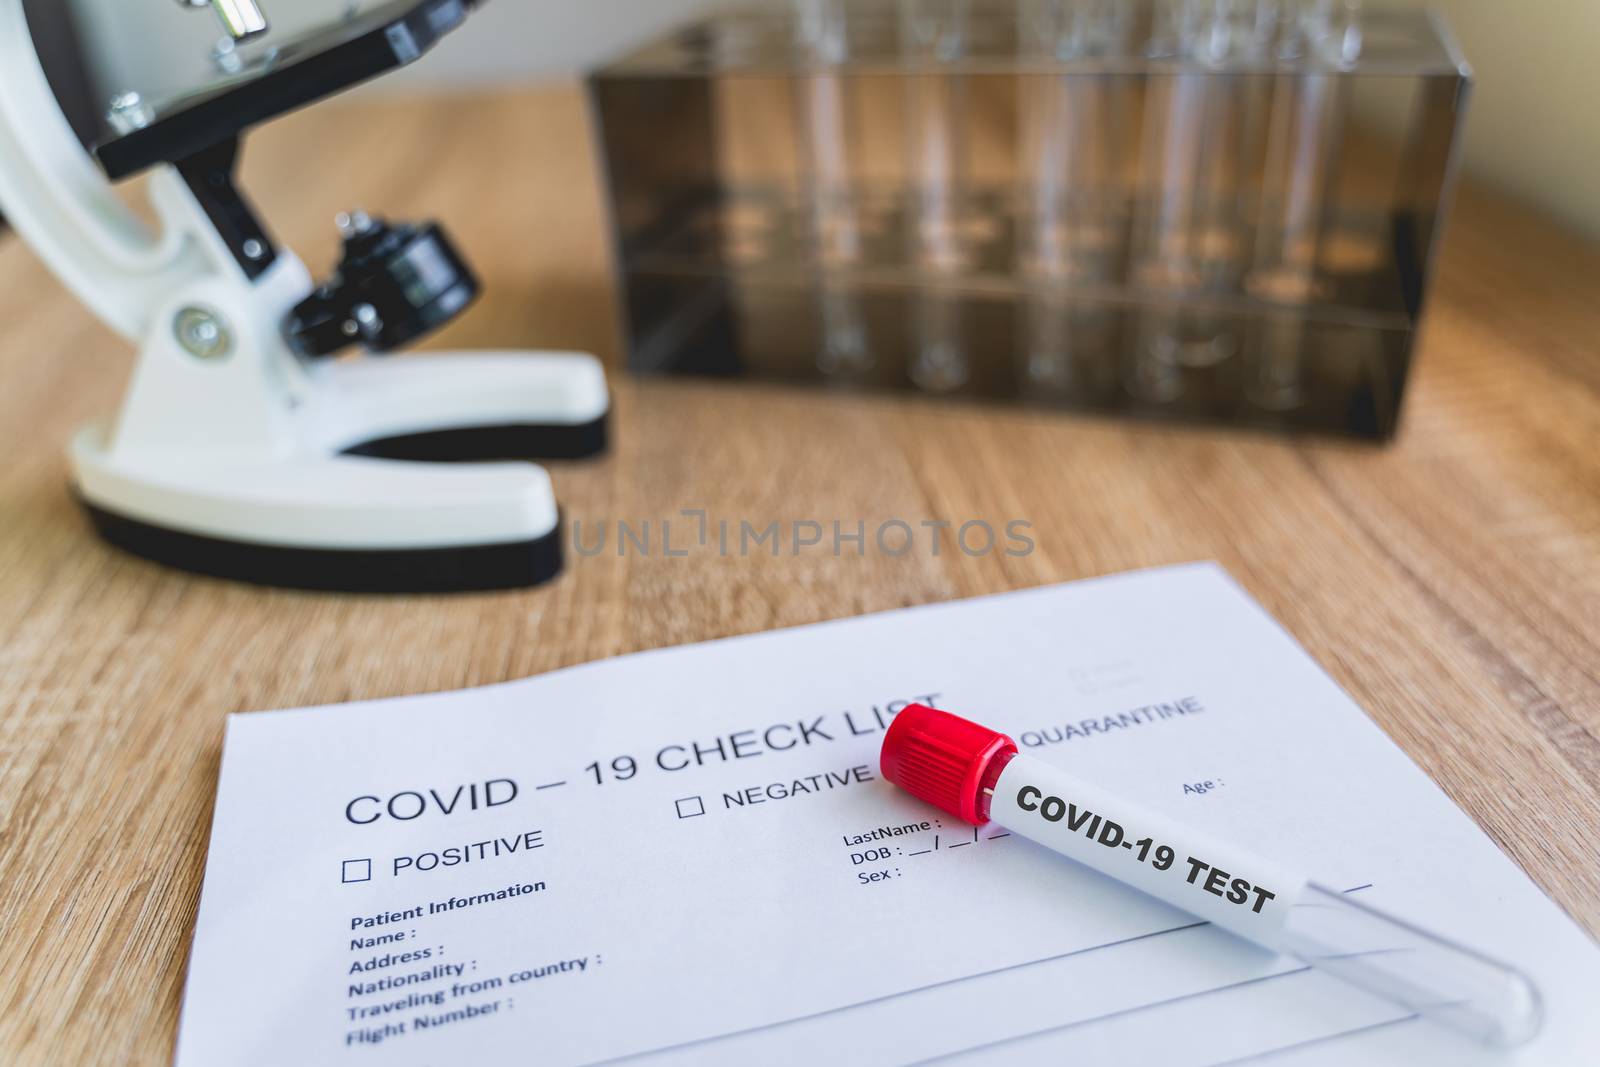 COVID19 Check List and blood test tube to detect corona virus in the lab. The corona virus outbreak is researched to find vaccines to prevent the disease in Epidemiology or  infectious concept